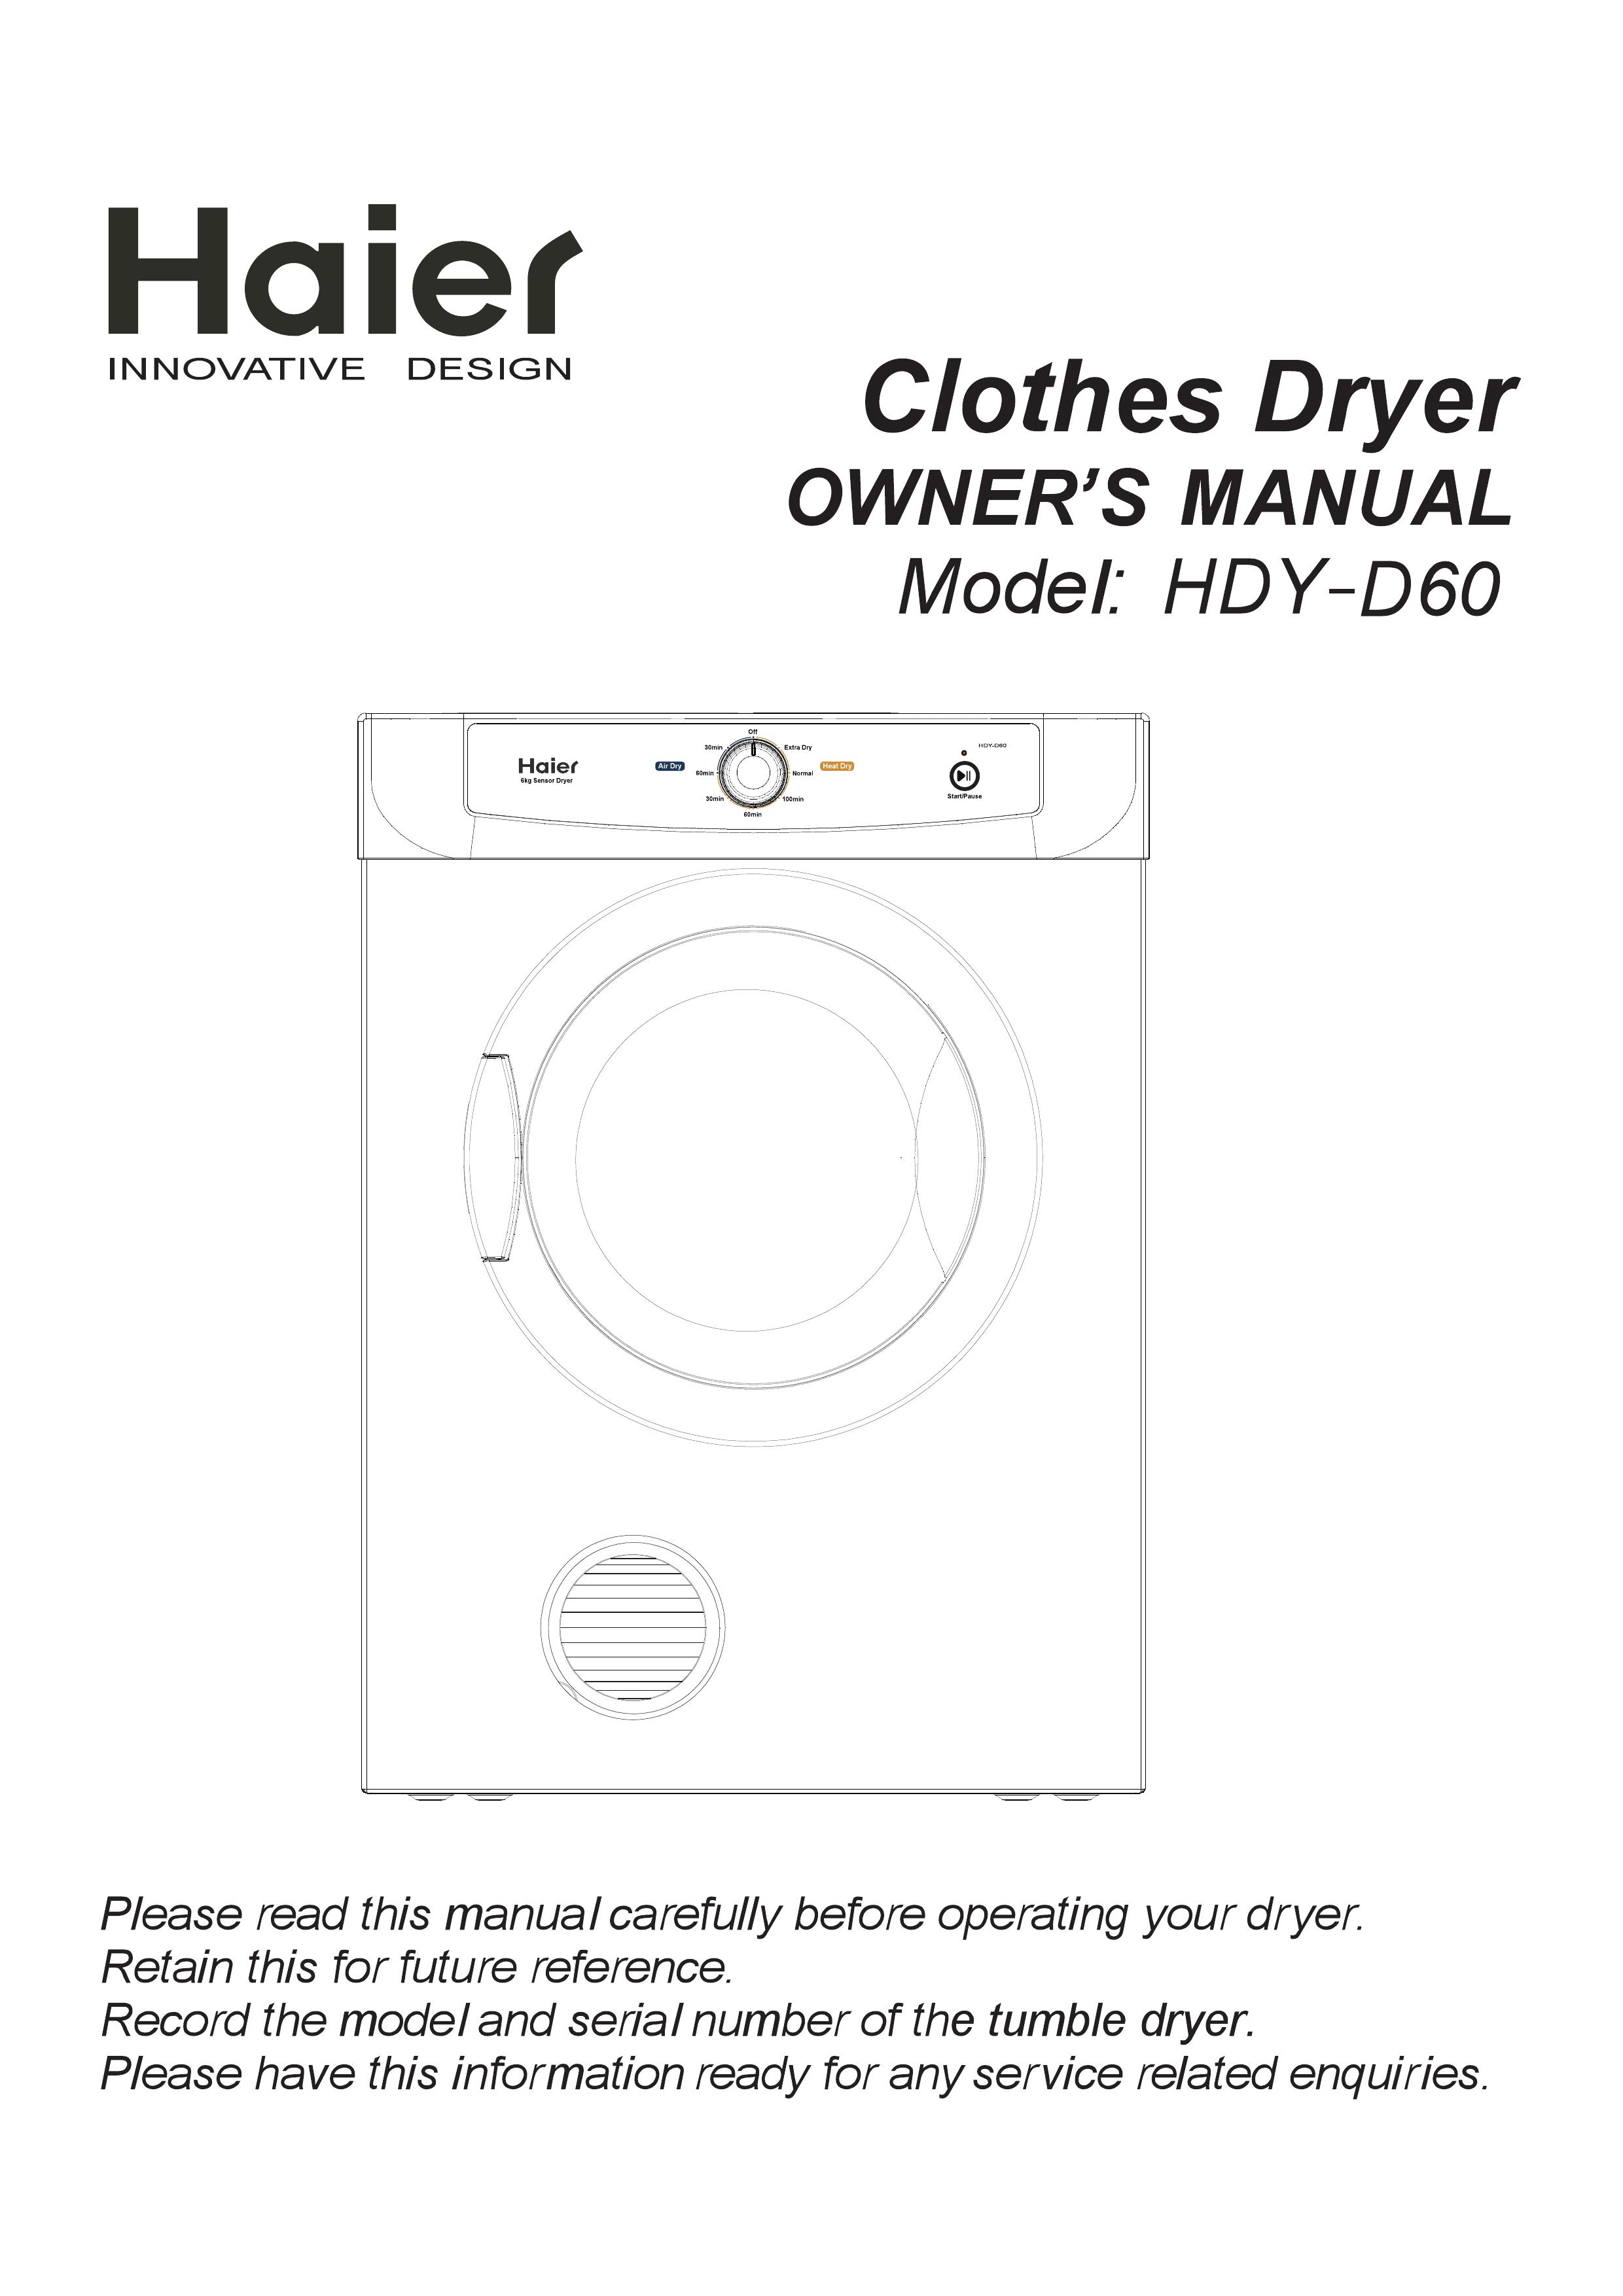 Haier HDY-D60 Clothes Dryer User Manual